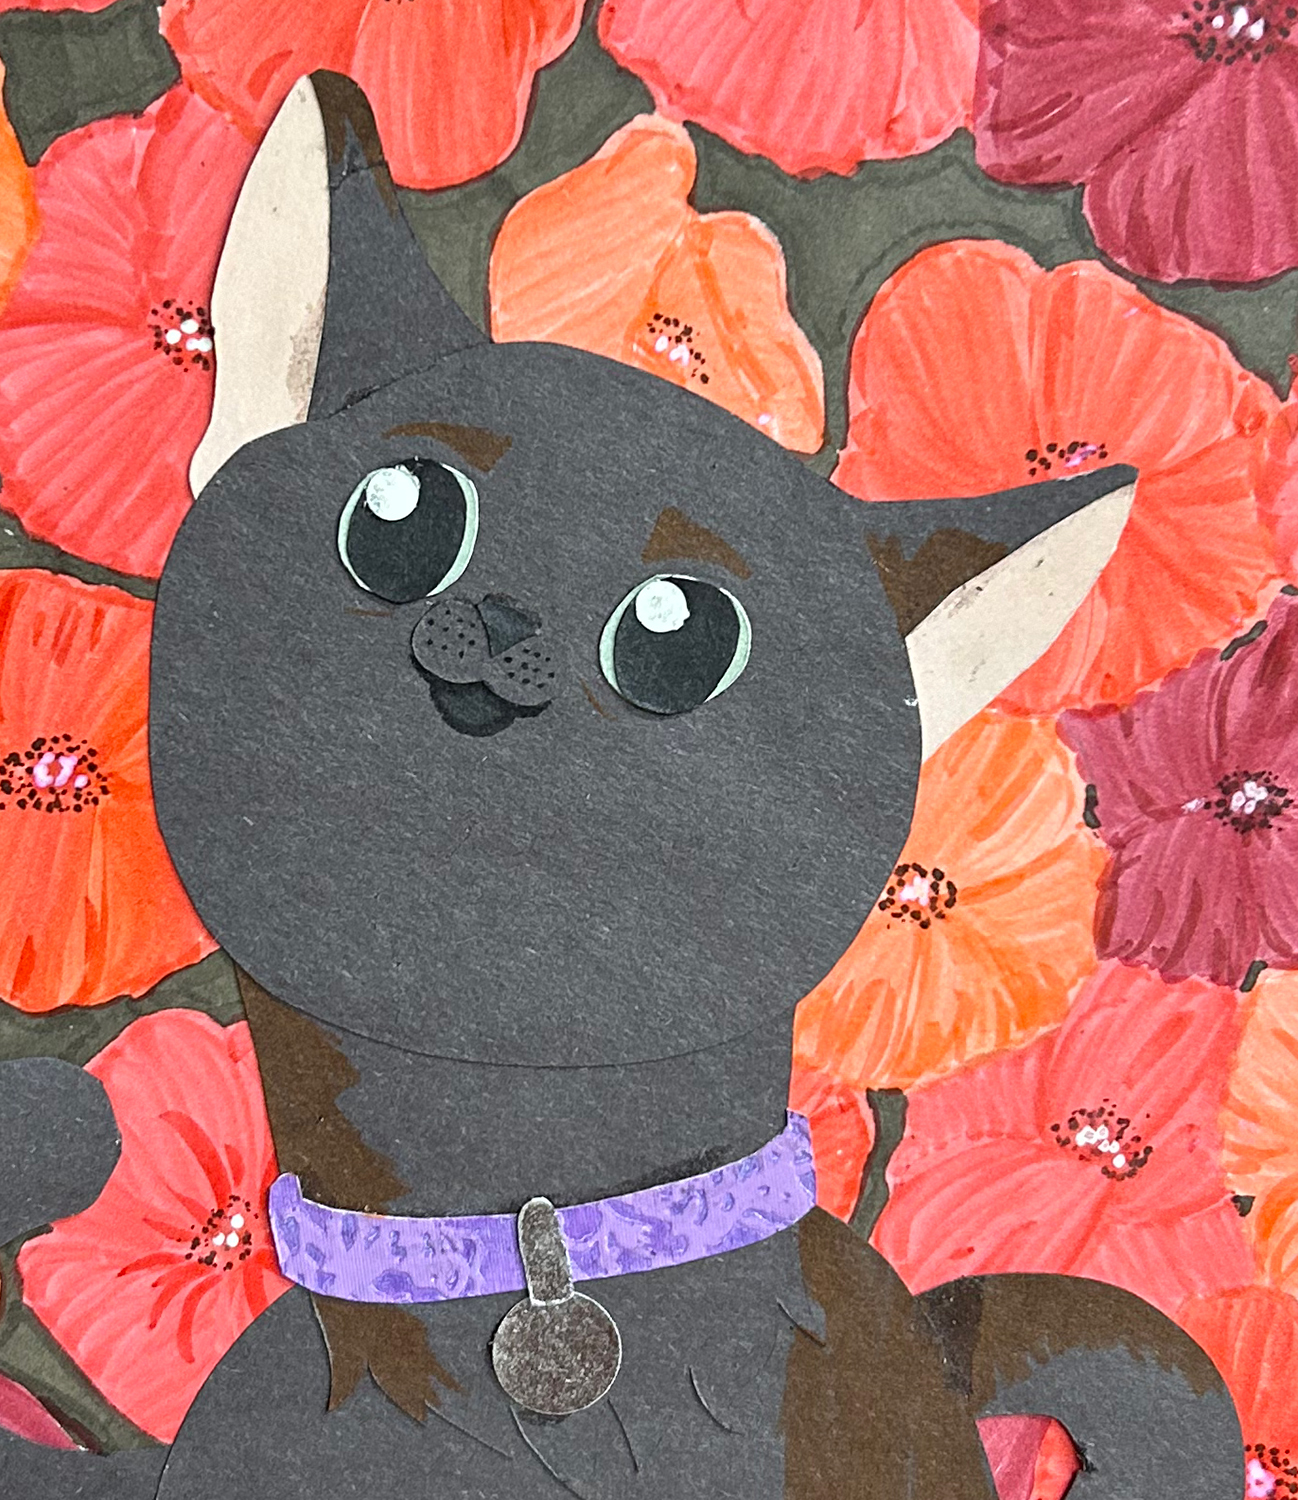 Close-up image of cut-paper portrait of a tortoiseshell cat with green eyes. A purple collar with a silver charm rests on the cat's neck. The background is filled with drawn poppies.